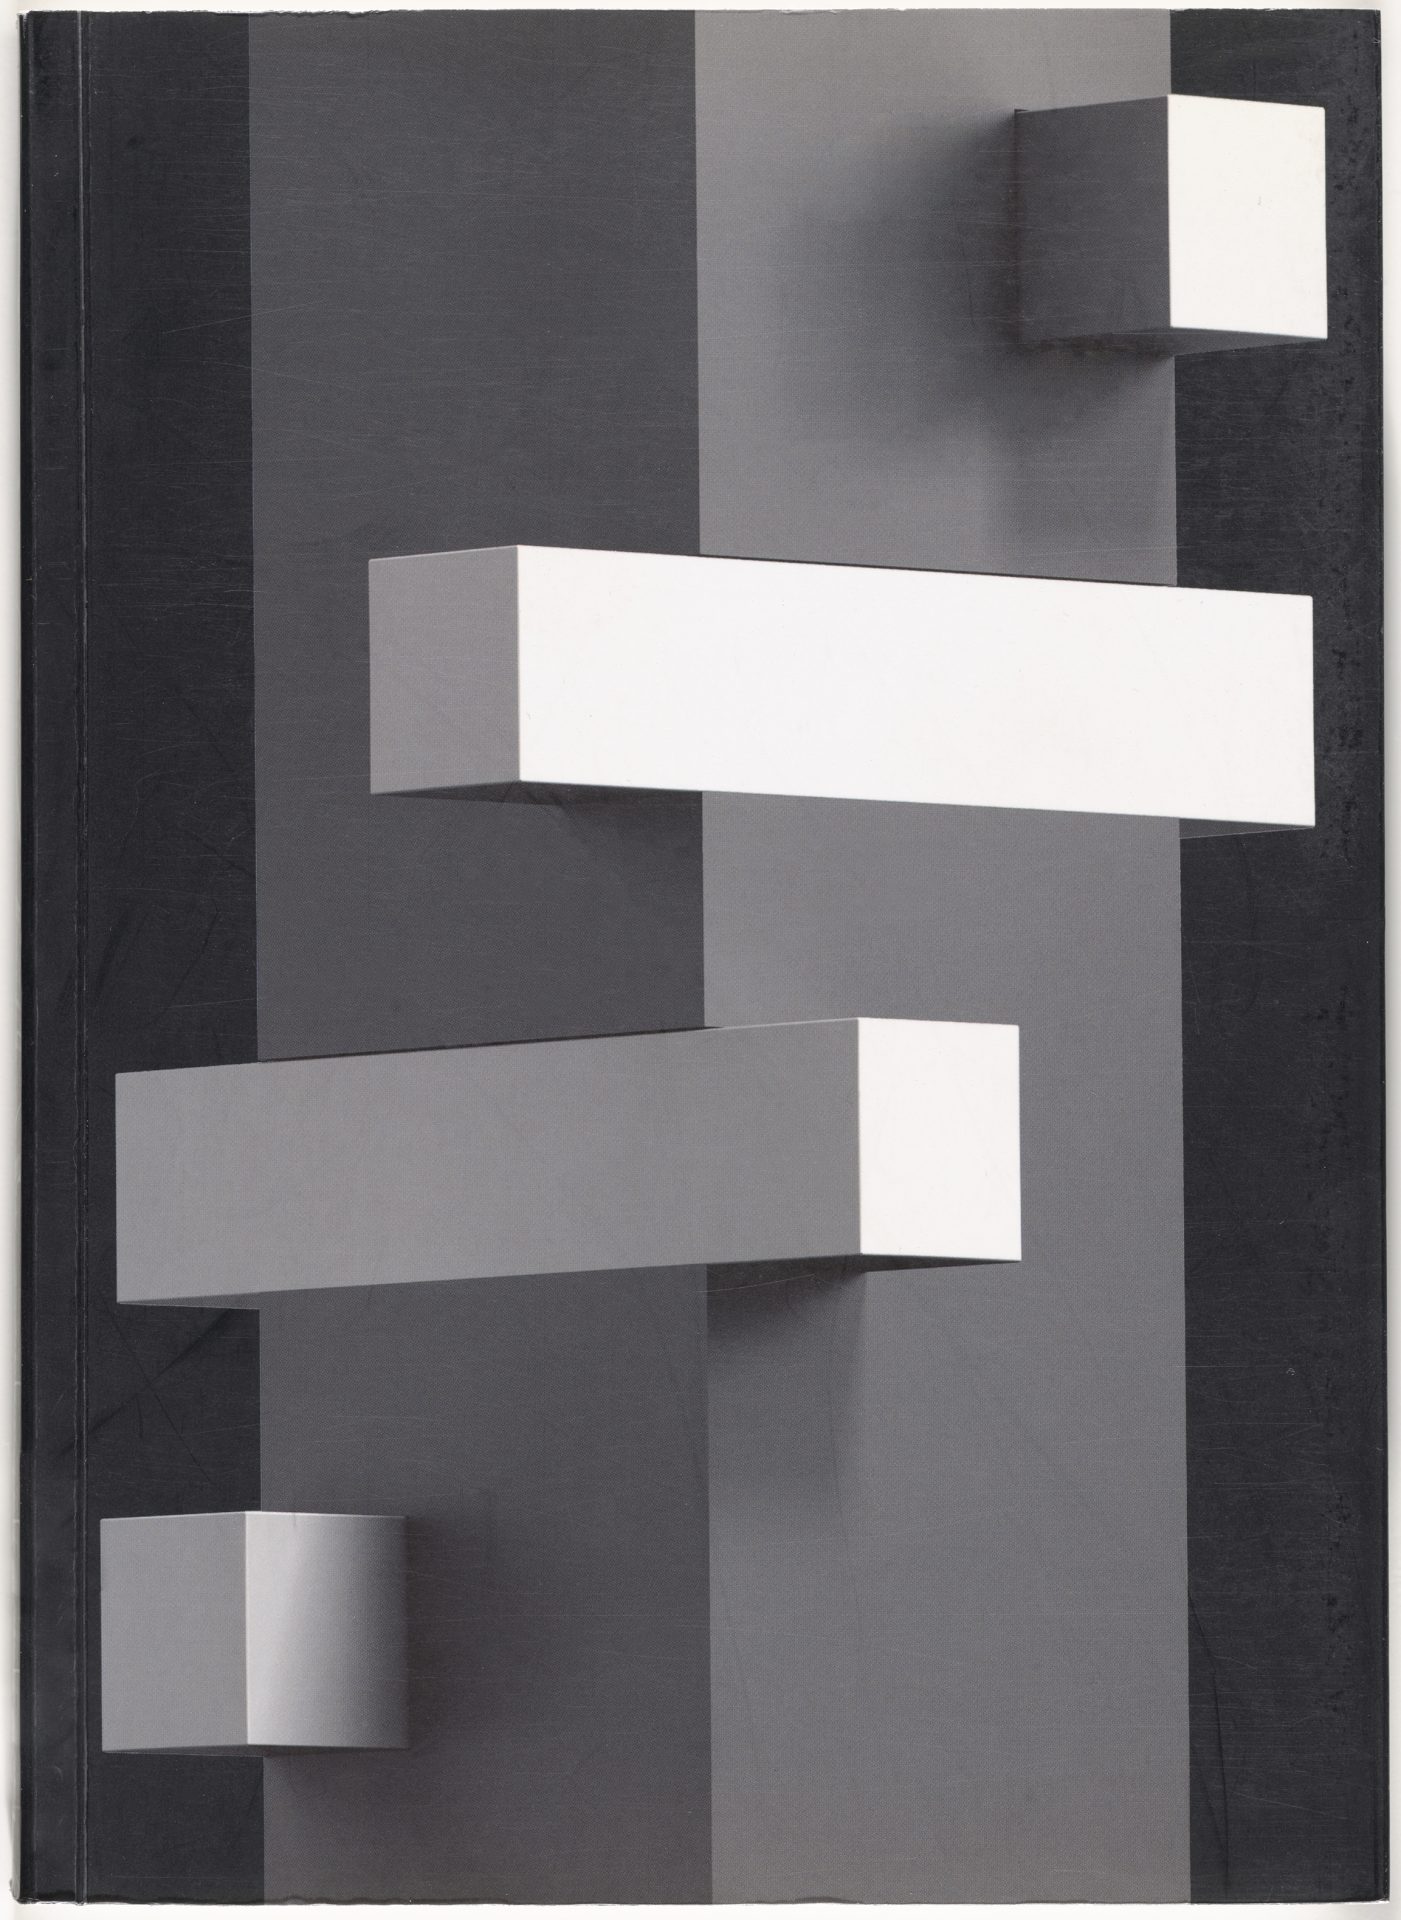 Cover exhibition catalog. A black and white image of rectangles can be seen. There are several white horizontal bars on a rectangular tower.